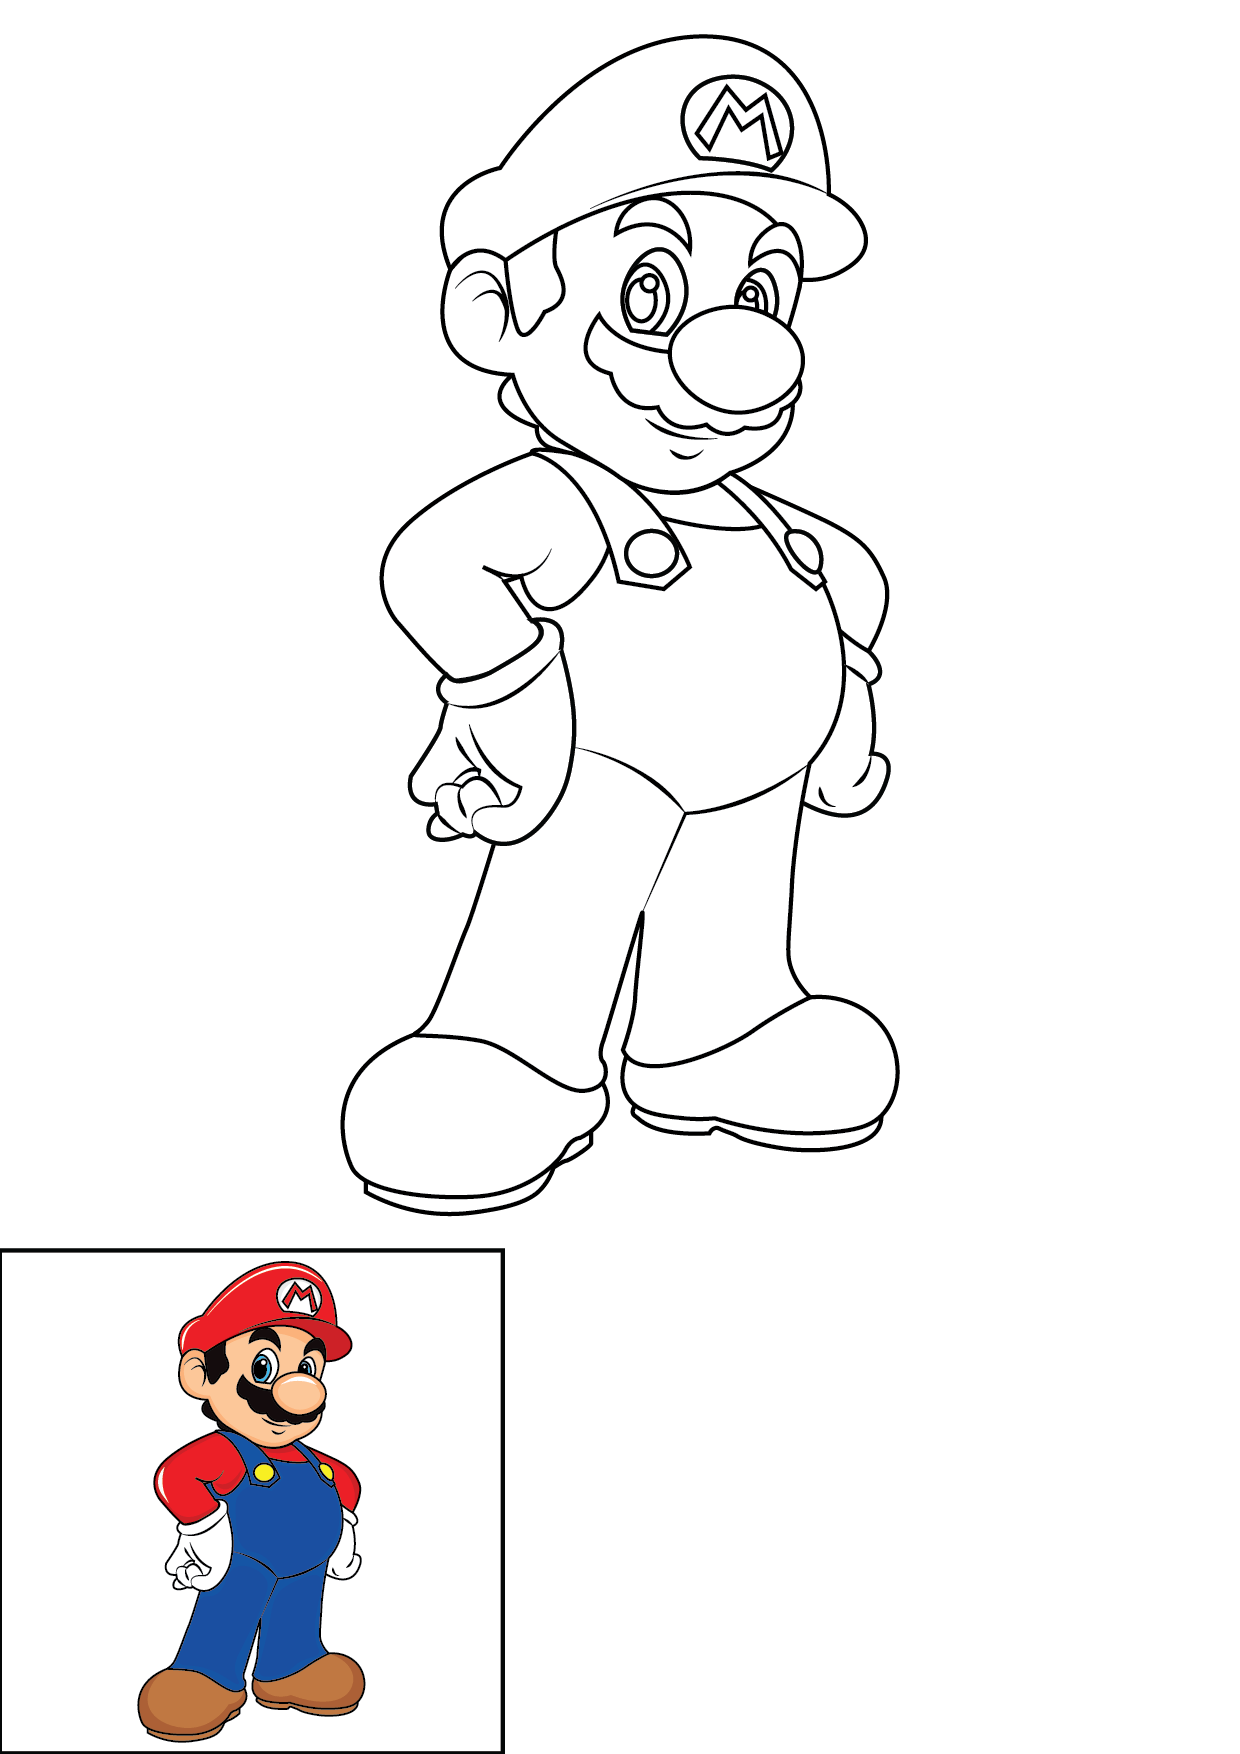 How to Draw A Super Mario Step by Step Printable Color